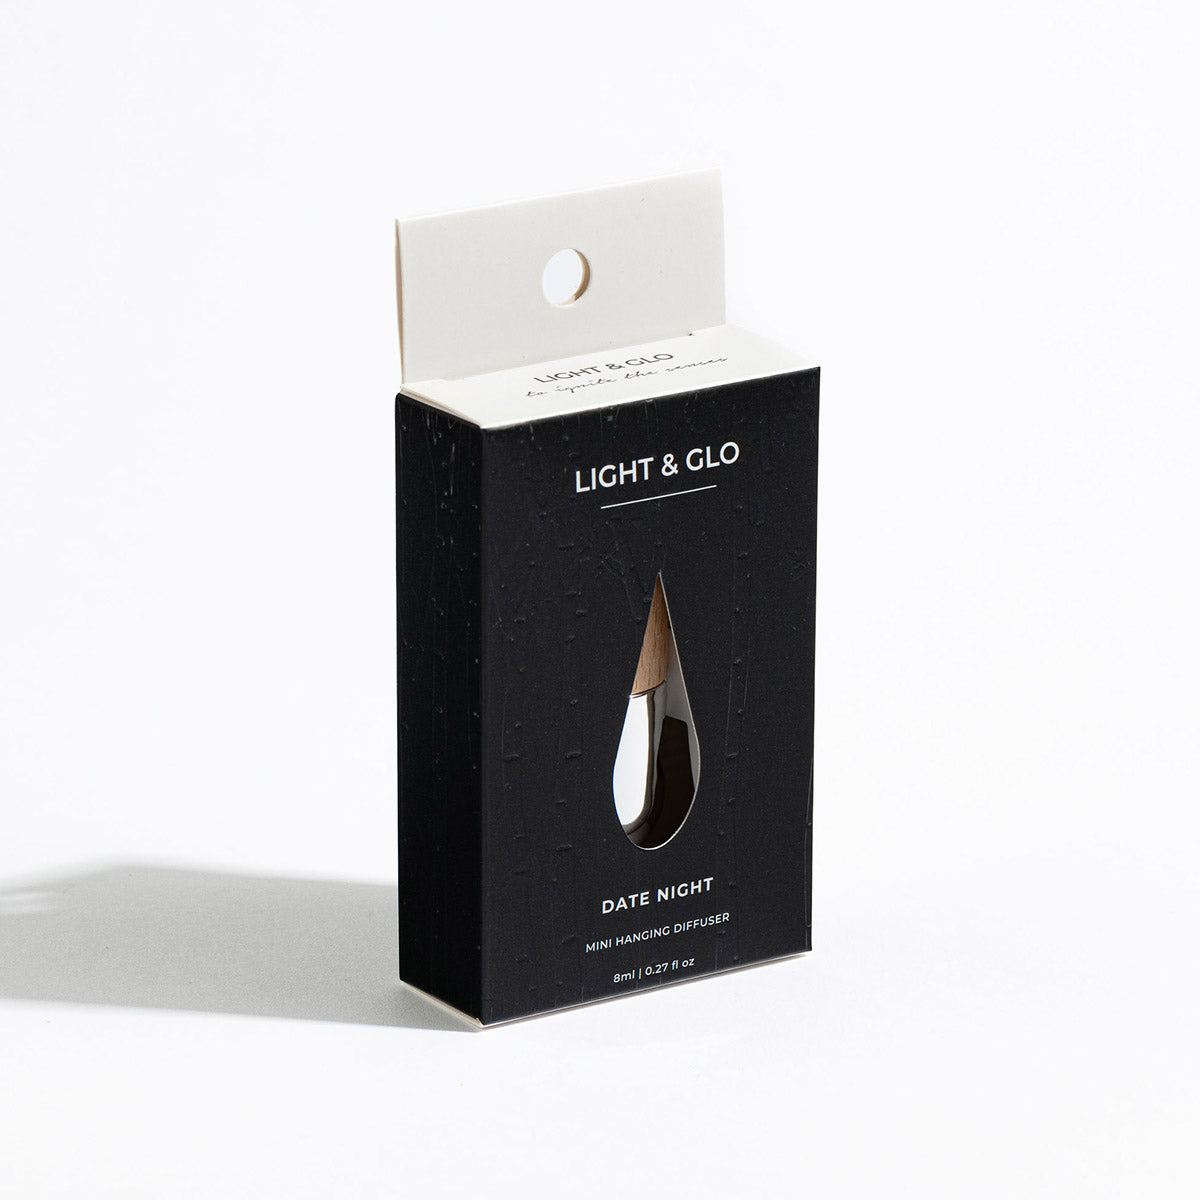 Date Night - Mini Hanging Diffuser | Luxury Candles & Home Fragrances by Light + Glo